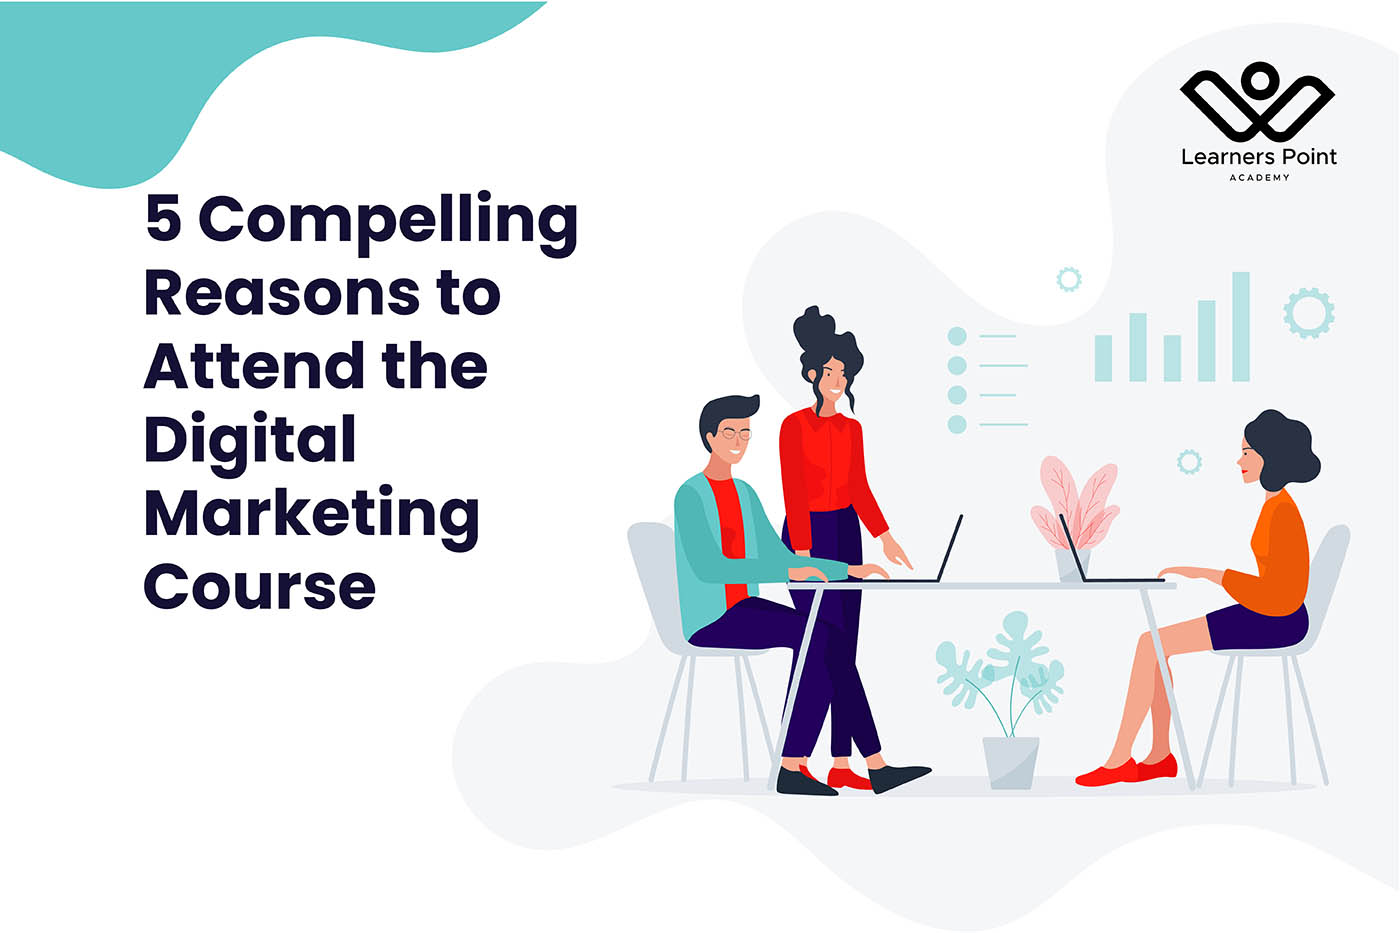 5 Compelling Reasons to Attend the Digital Marketing Course